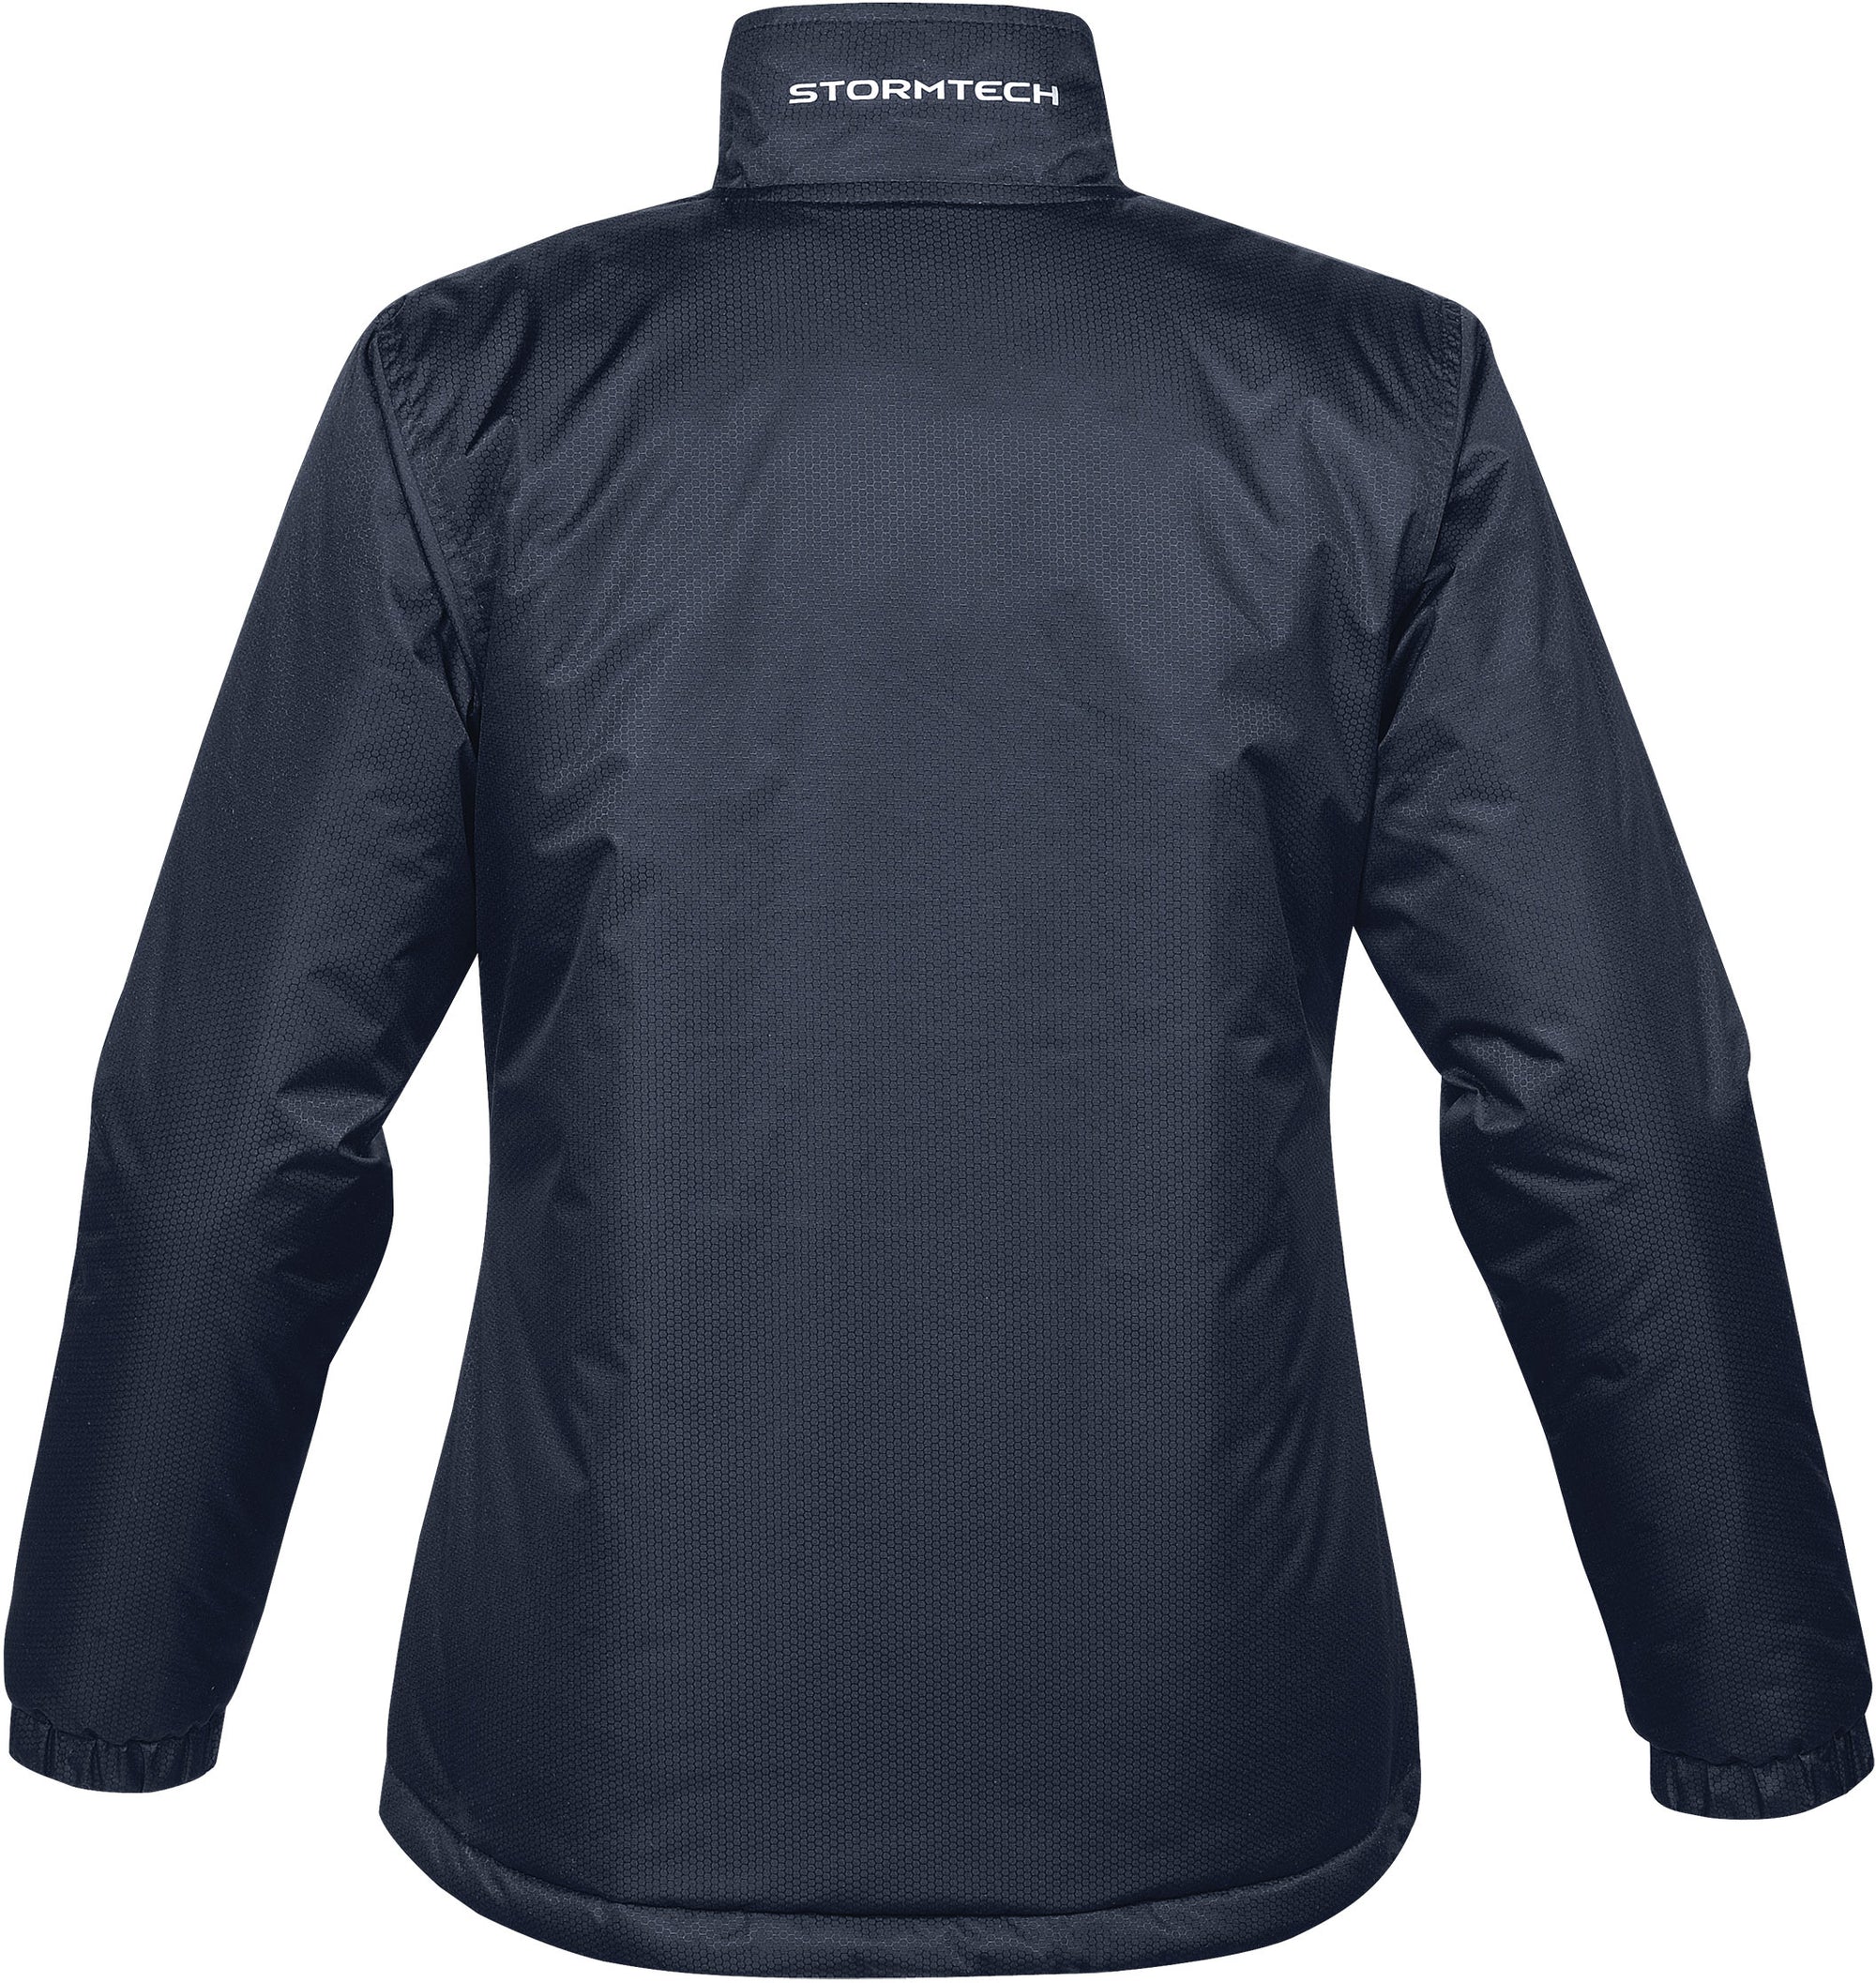 STORMTECH LADIES AXIS THERMAL SHELL JACKET